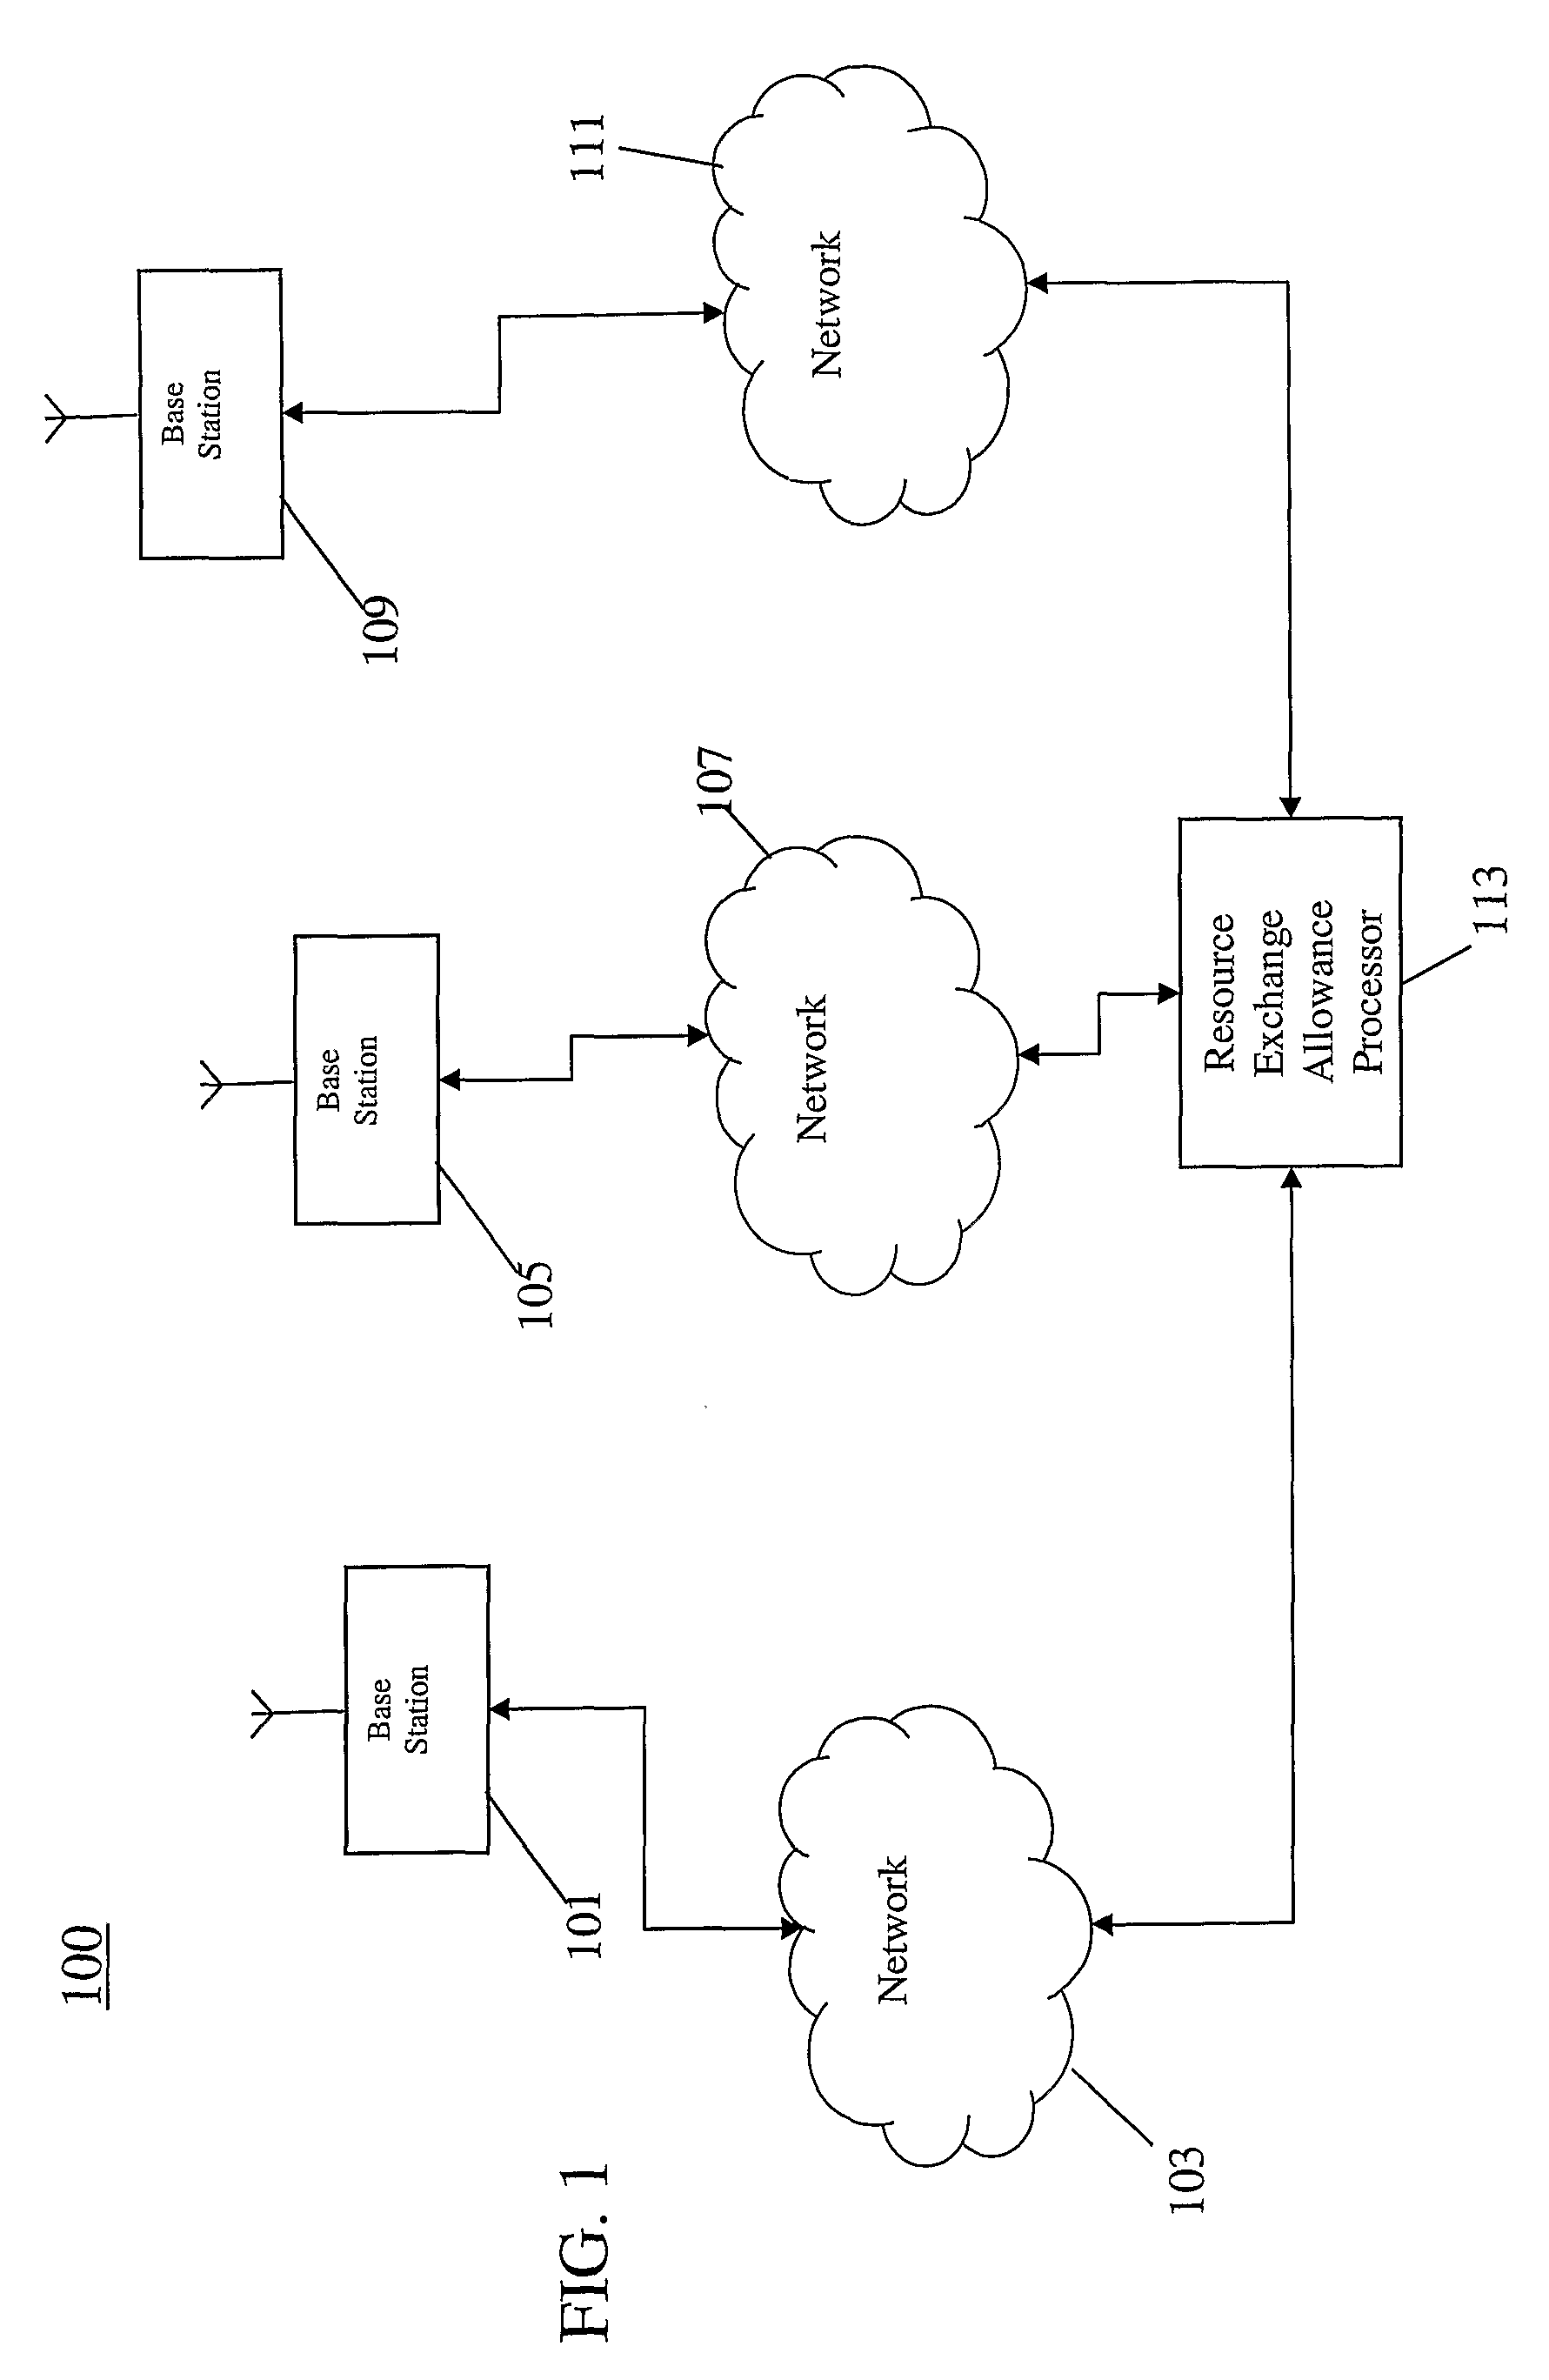 Apparatus and Method For Resource Sharing Between a Plurality of Communication Networks